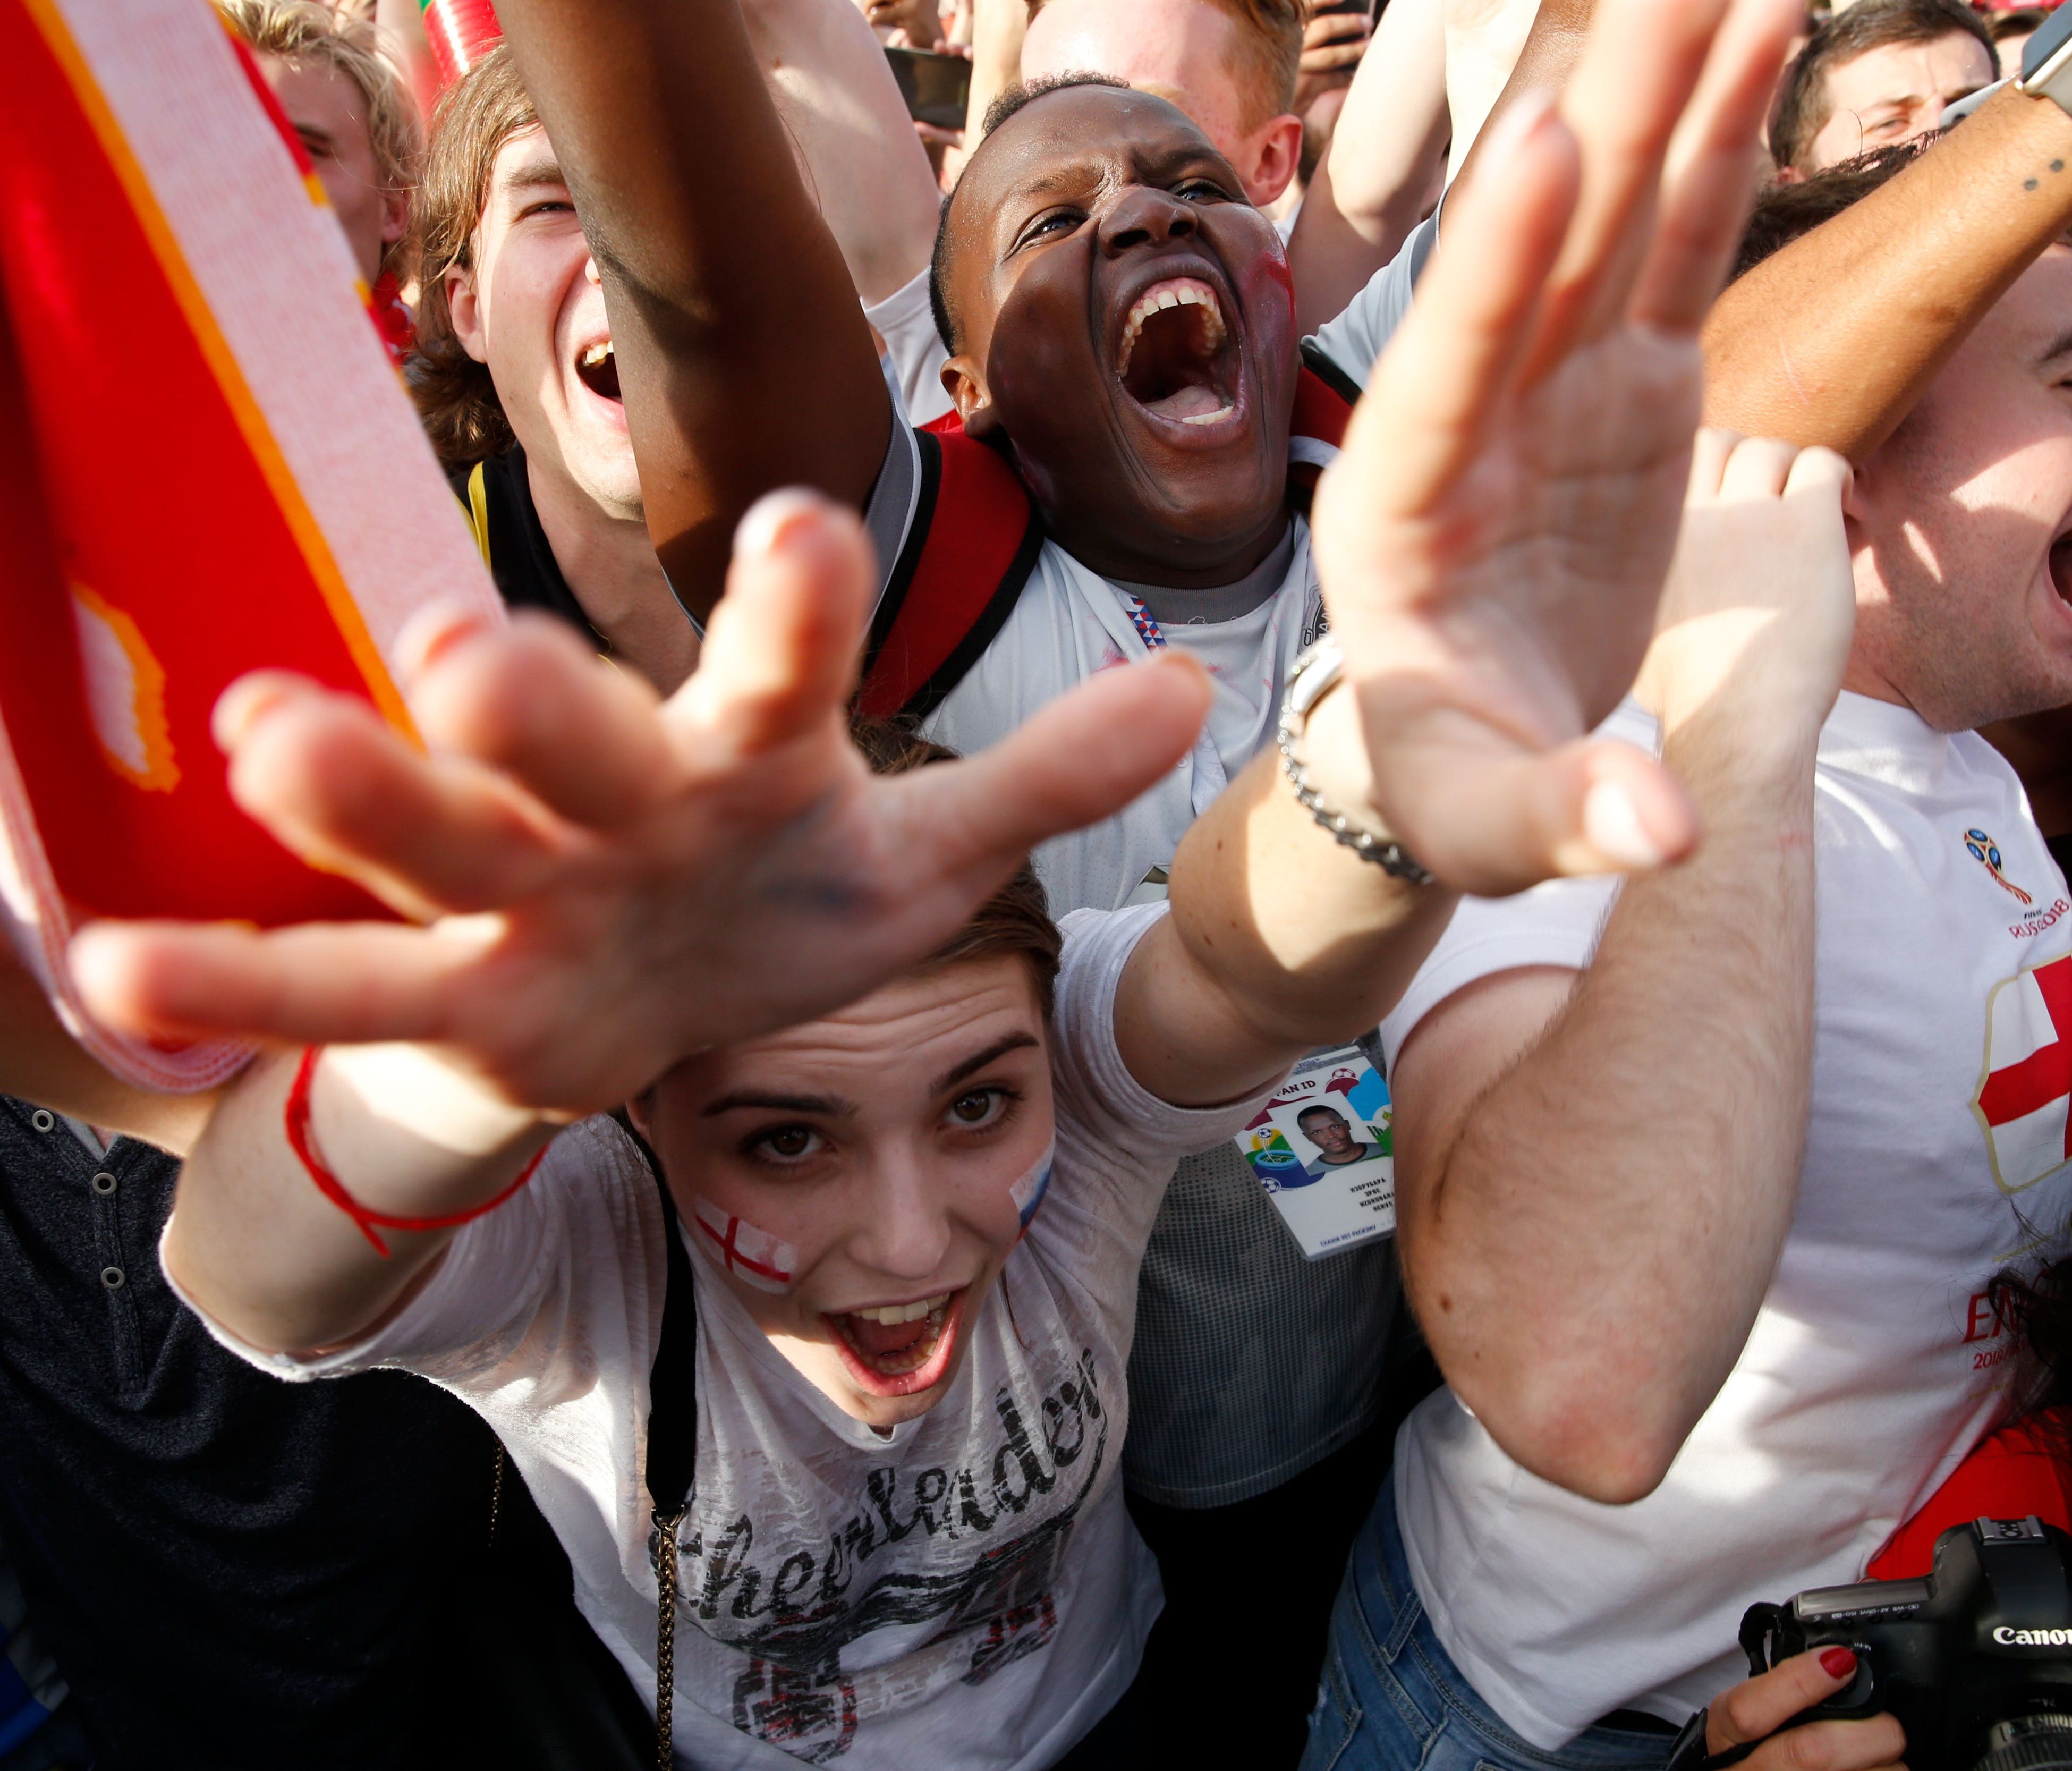 England fans celebrate at a fan fest in Moscow after the team's win against Sweden.